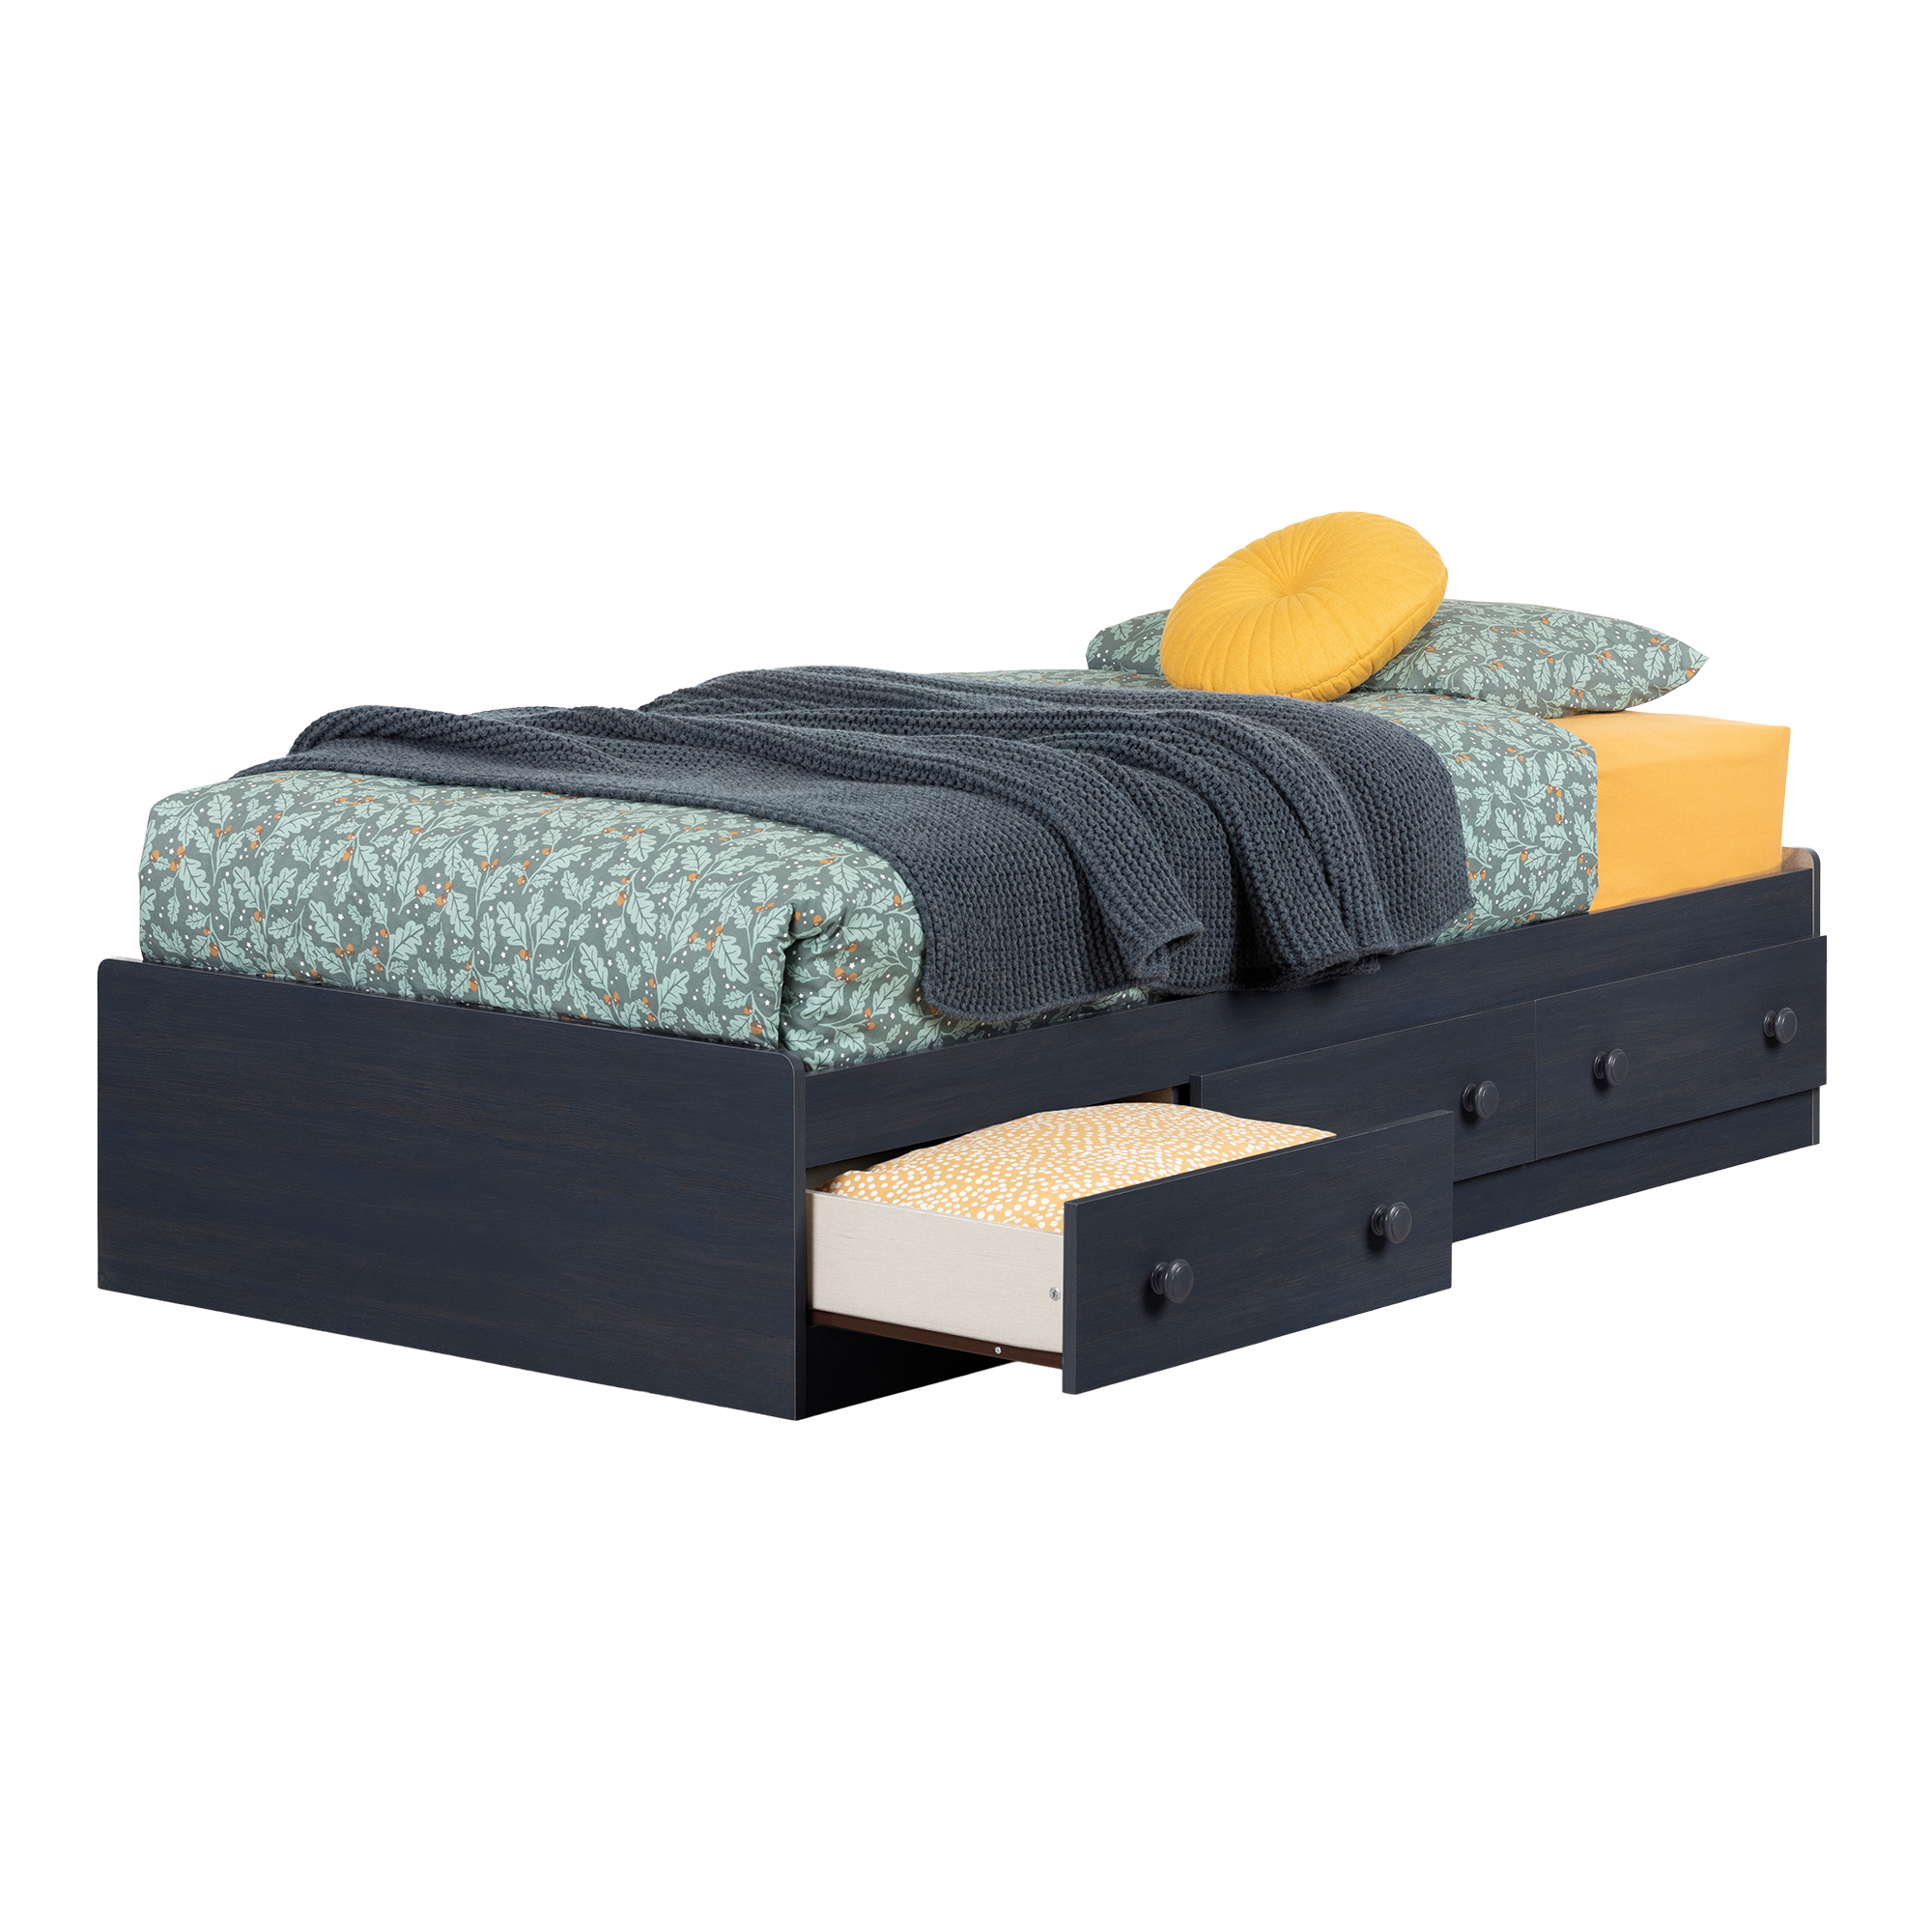 South Shore Summer Breeze 3-Drawer Storage Bed, Twin, Blueberry - image 1 of 8